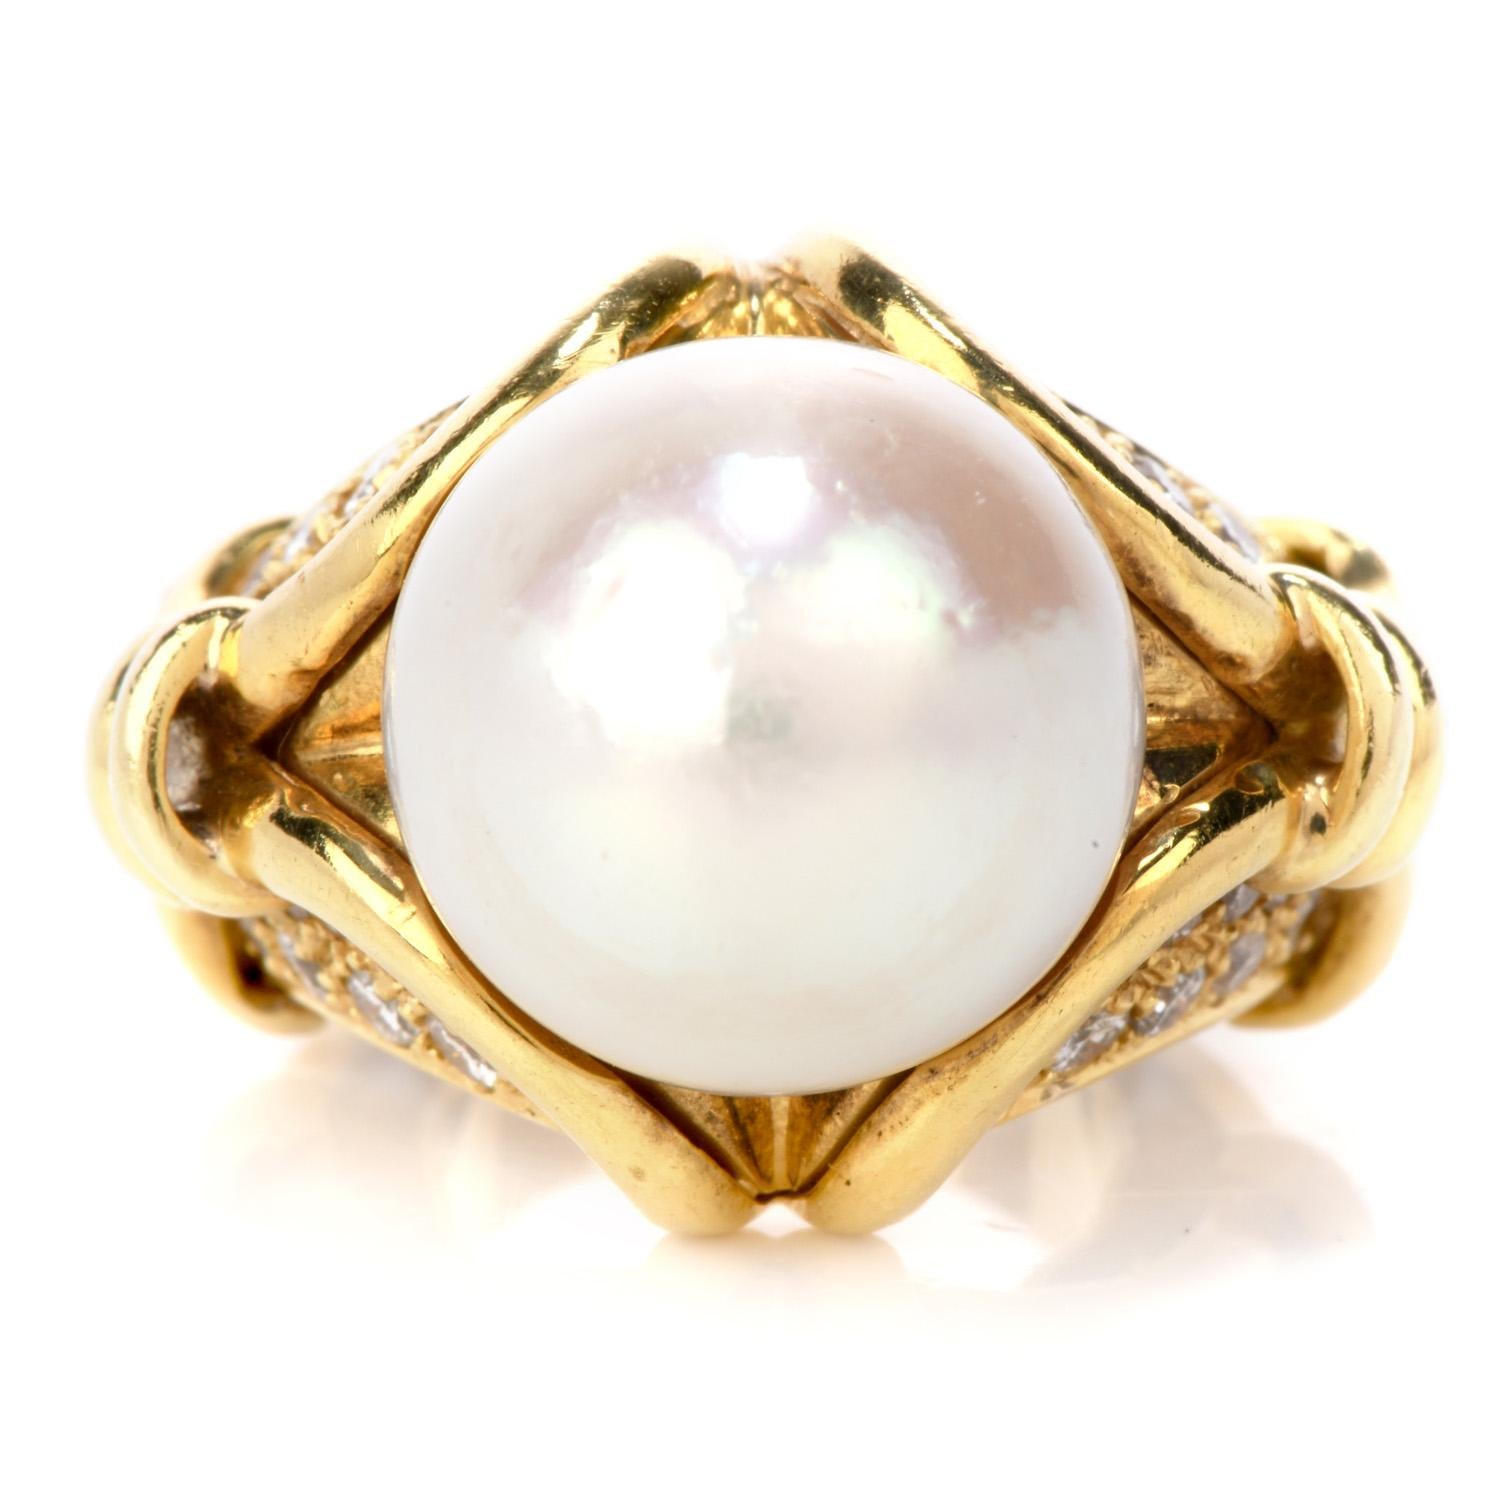 This enchanting cocktail ring is crafted in solid 18K Yellow gold and is centered by a beautiful genuine Pearl of approximately 13mm wide

It is furthermore embellished with 40 genuine round cut Diamonds weighing  approximately: 1.05 carats, H-I